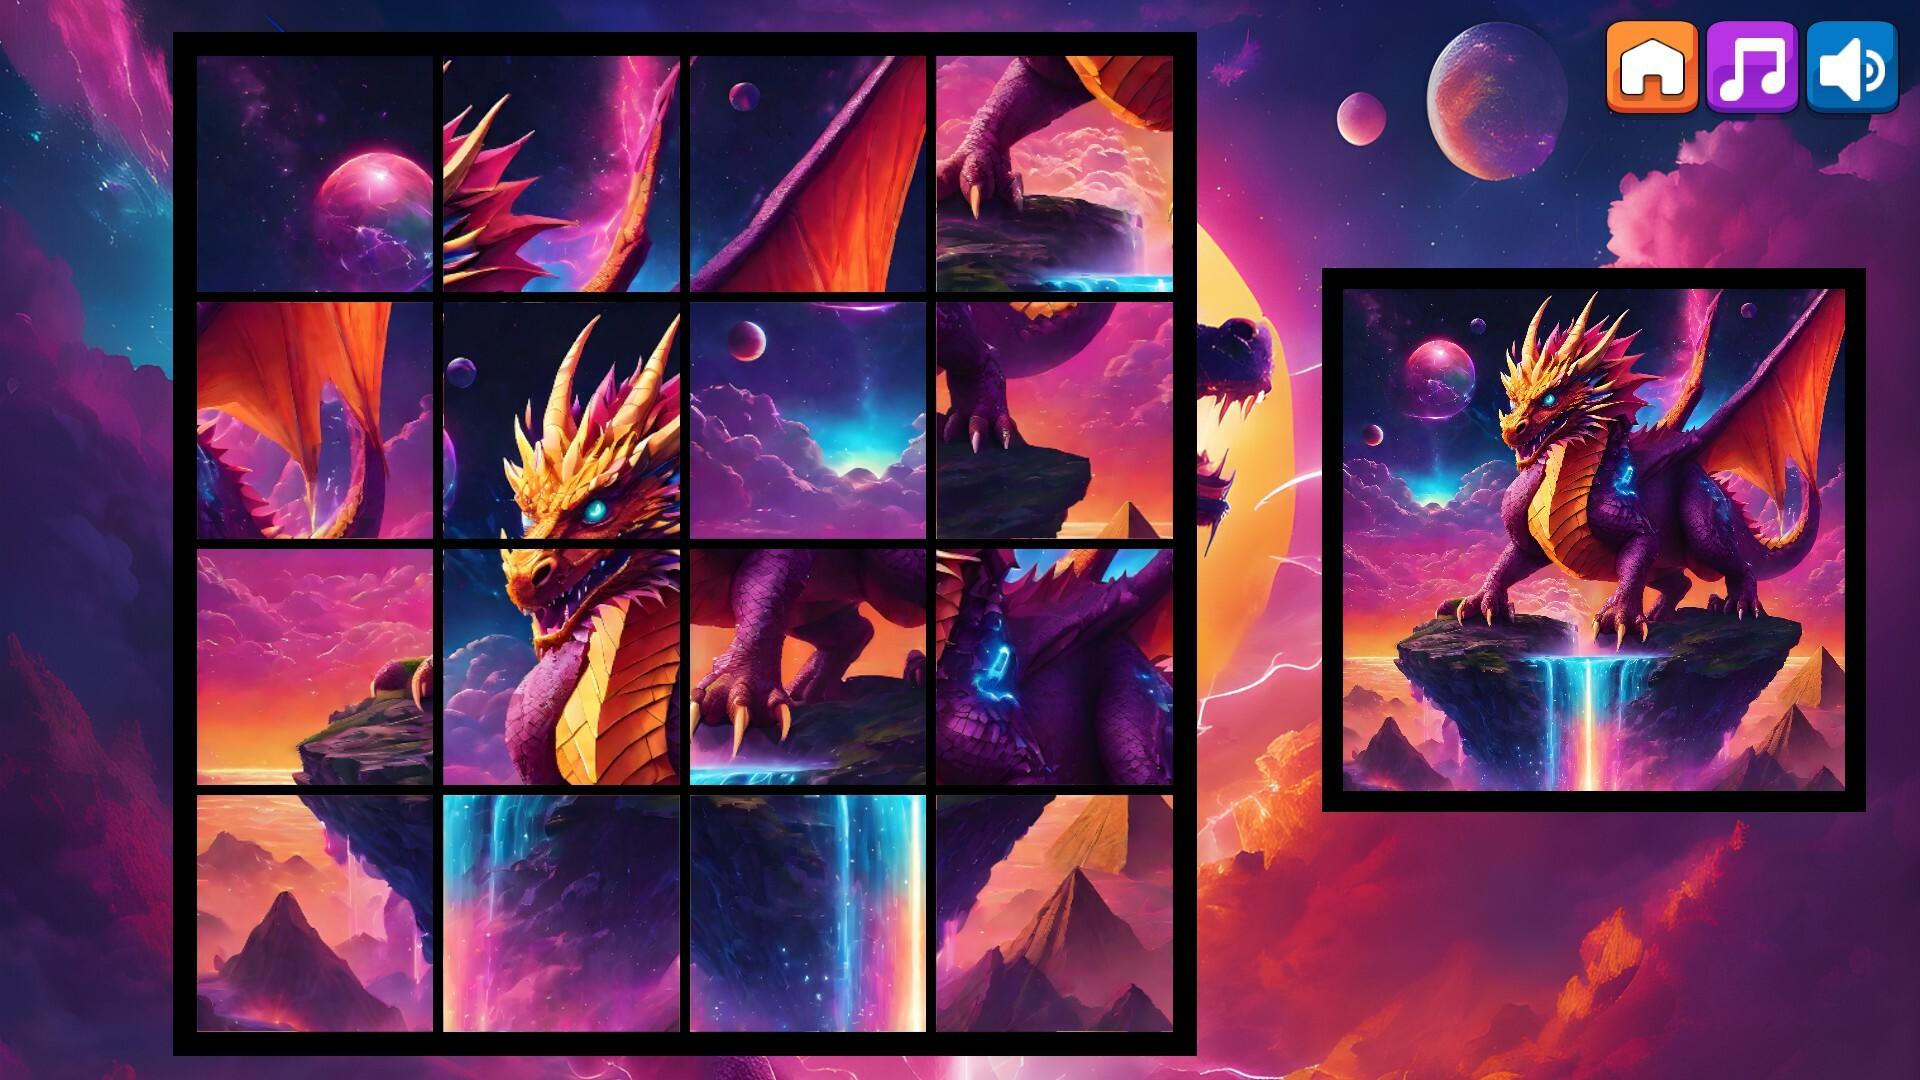 OG Puzzlers: Synthwave Dragons 게임 스크린 샷